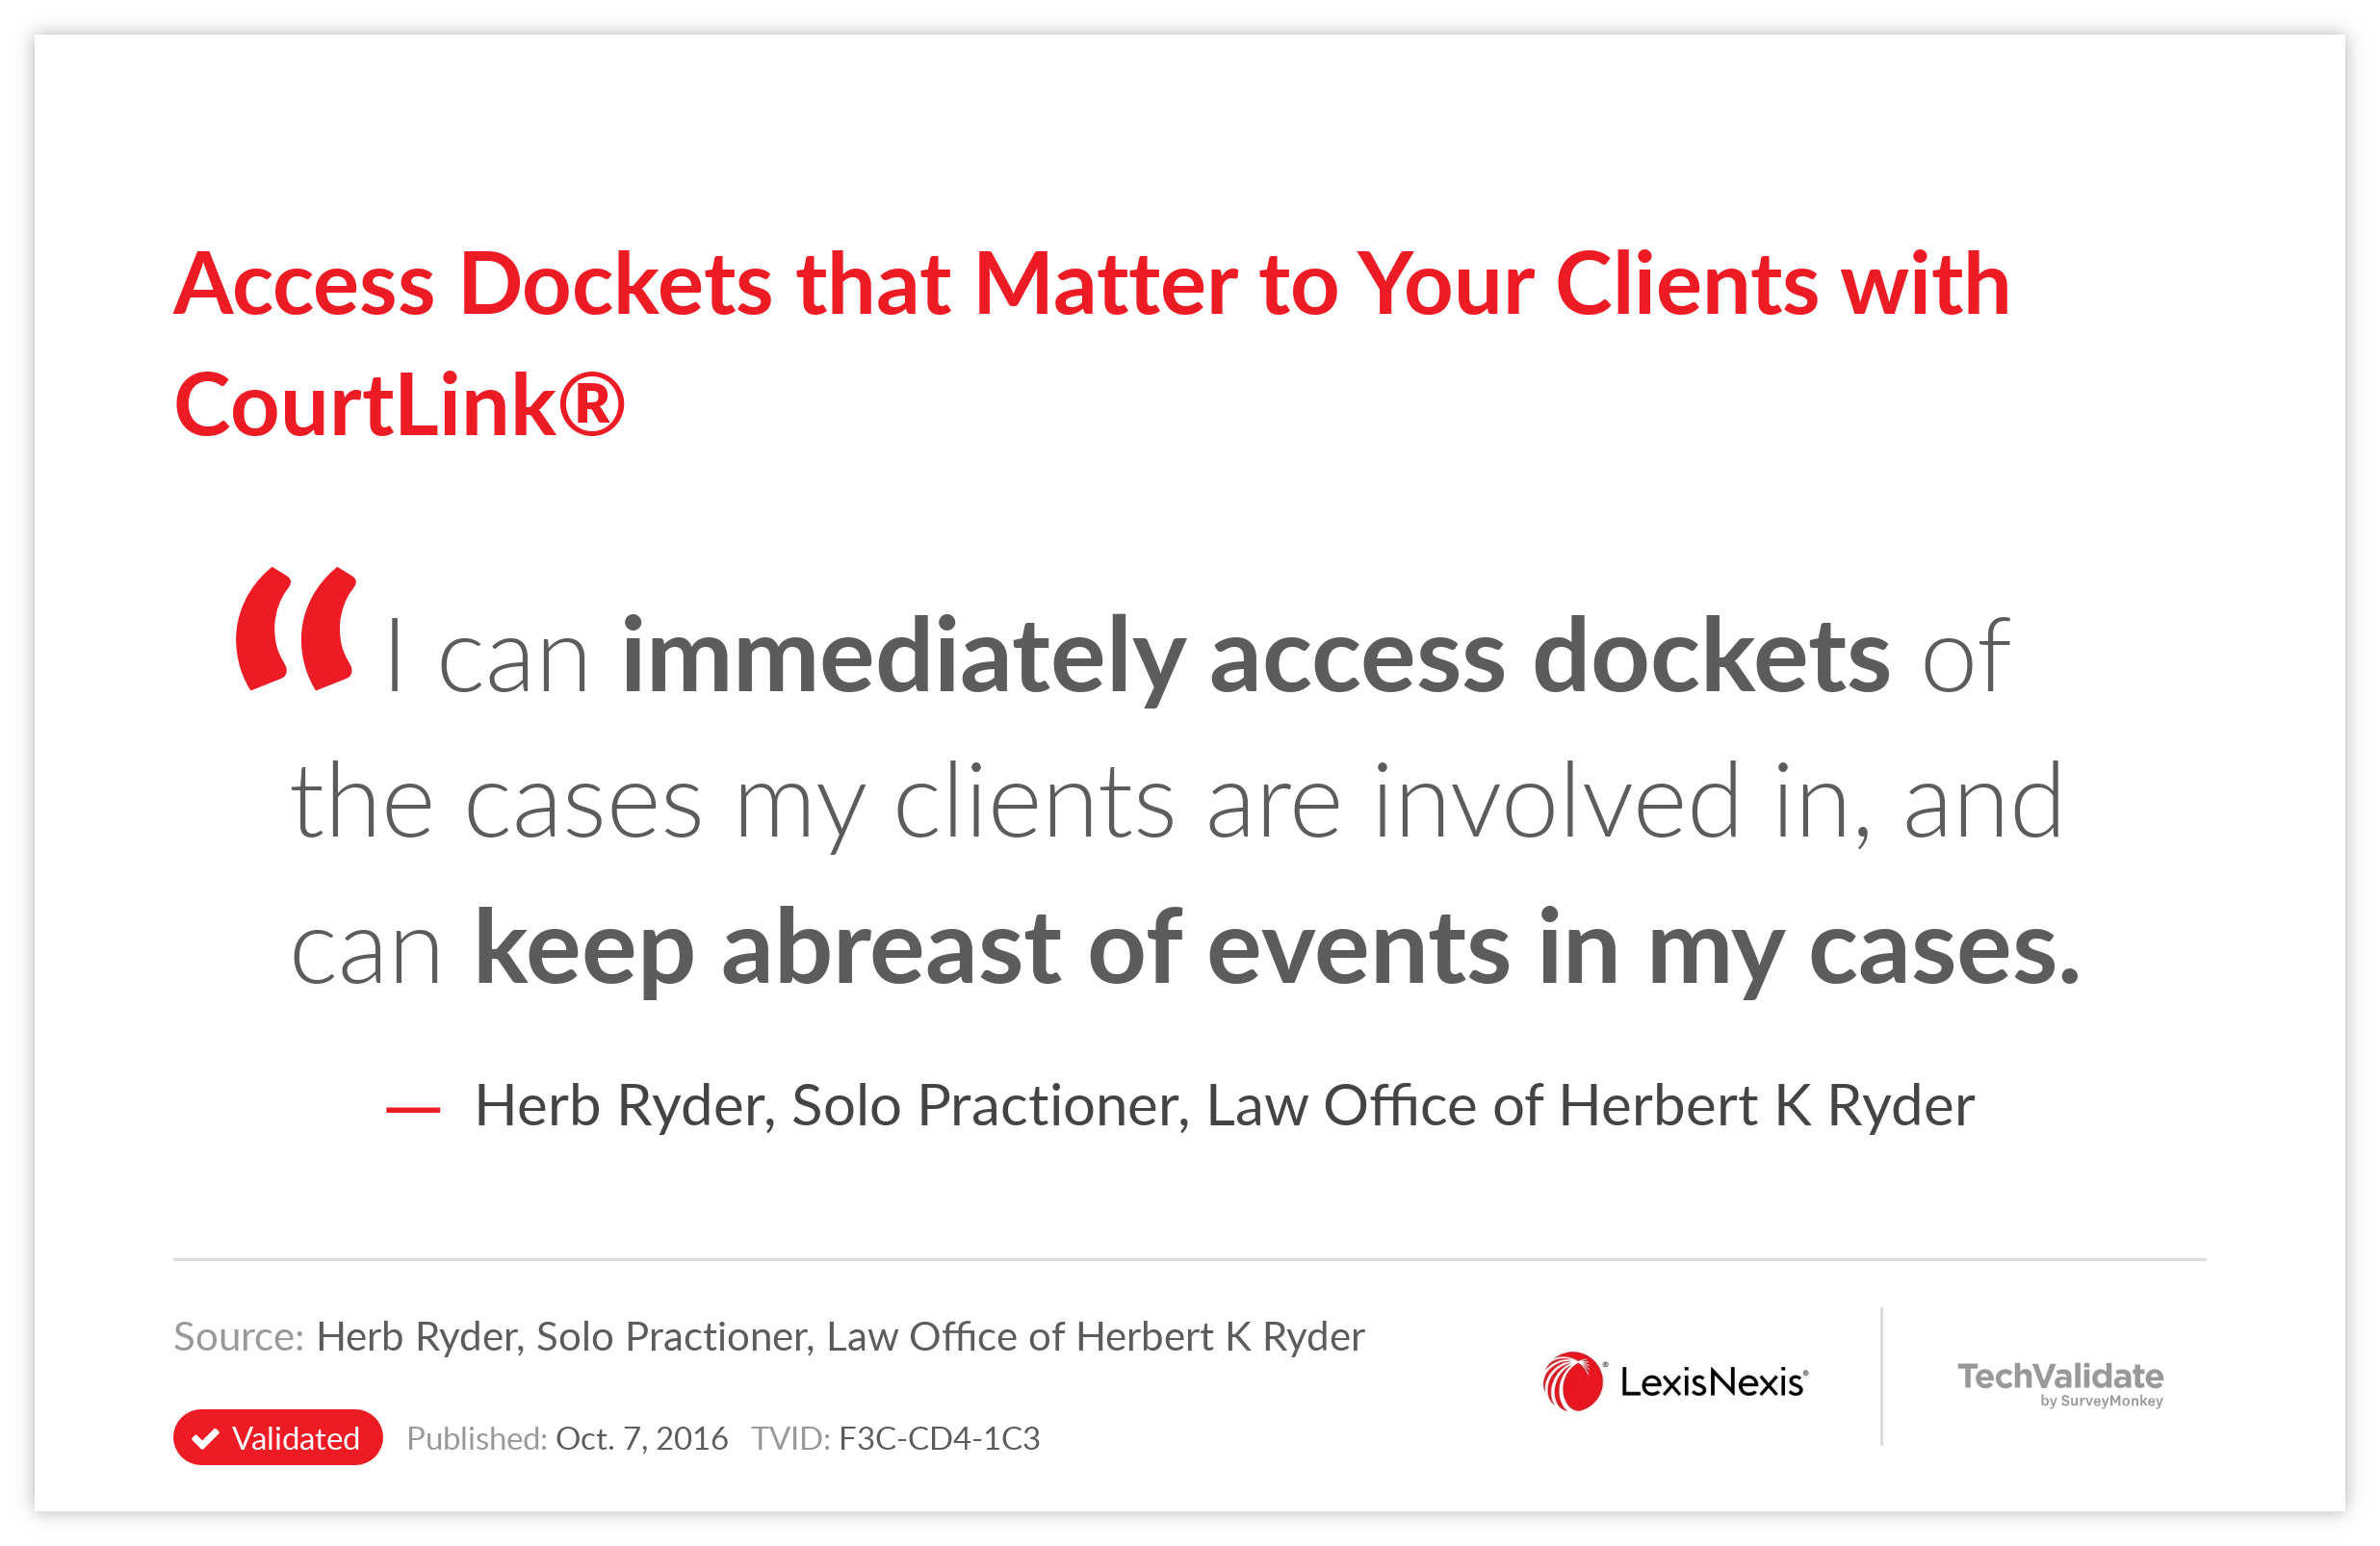 Access Dockets that Matter to Your Clients with CourtLink(R)